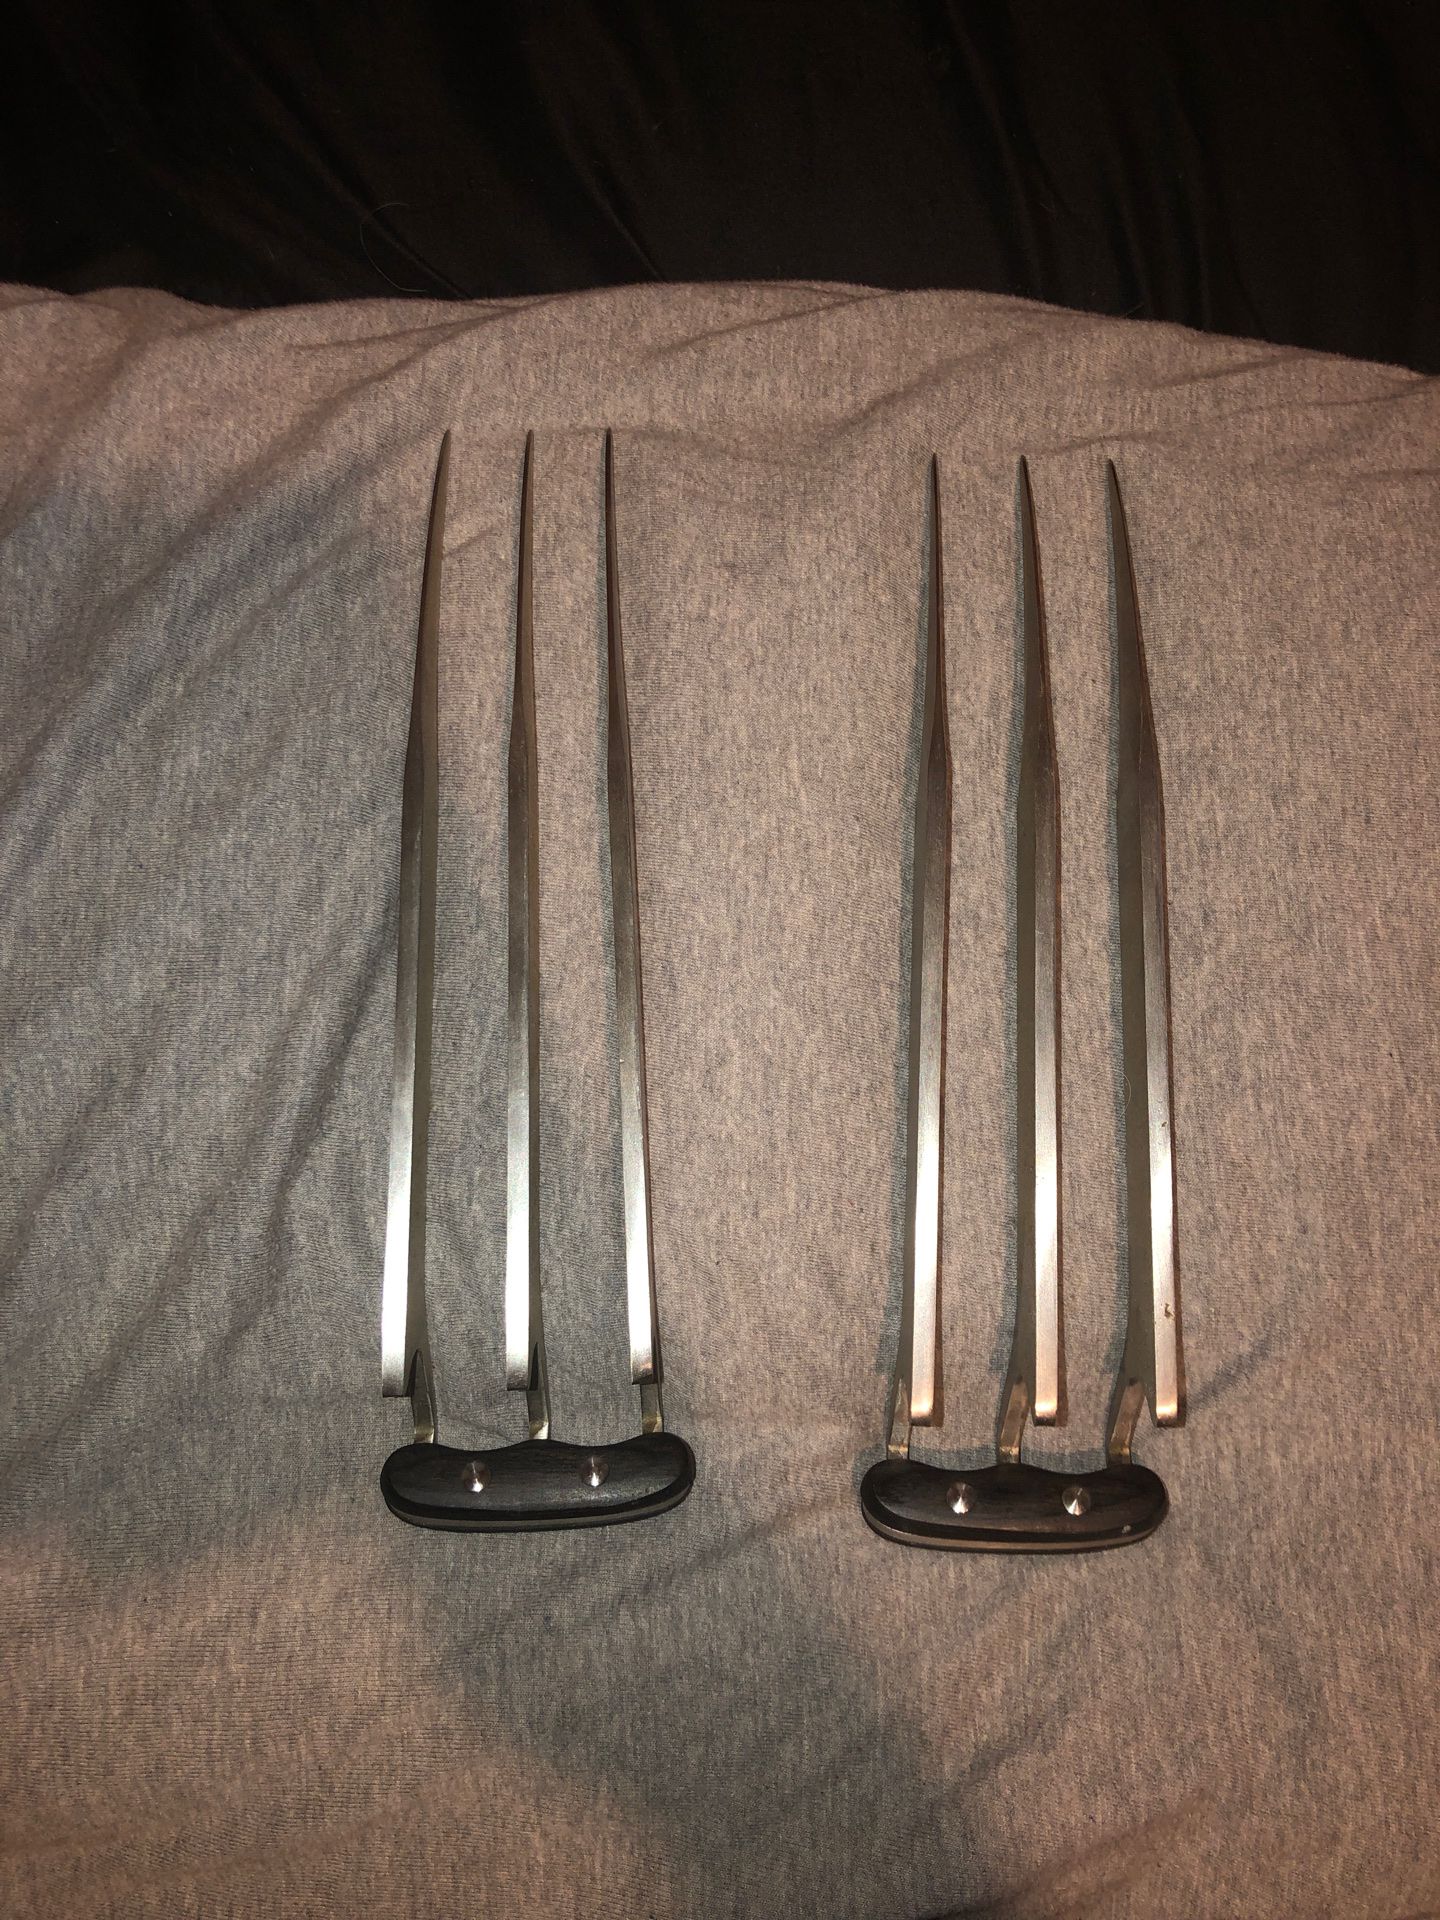 Steel wolverine claws 11inches